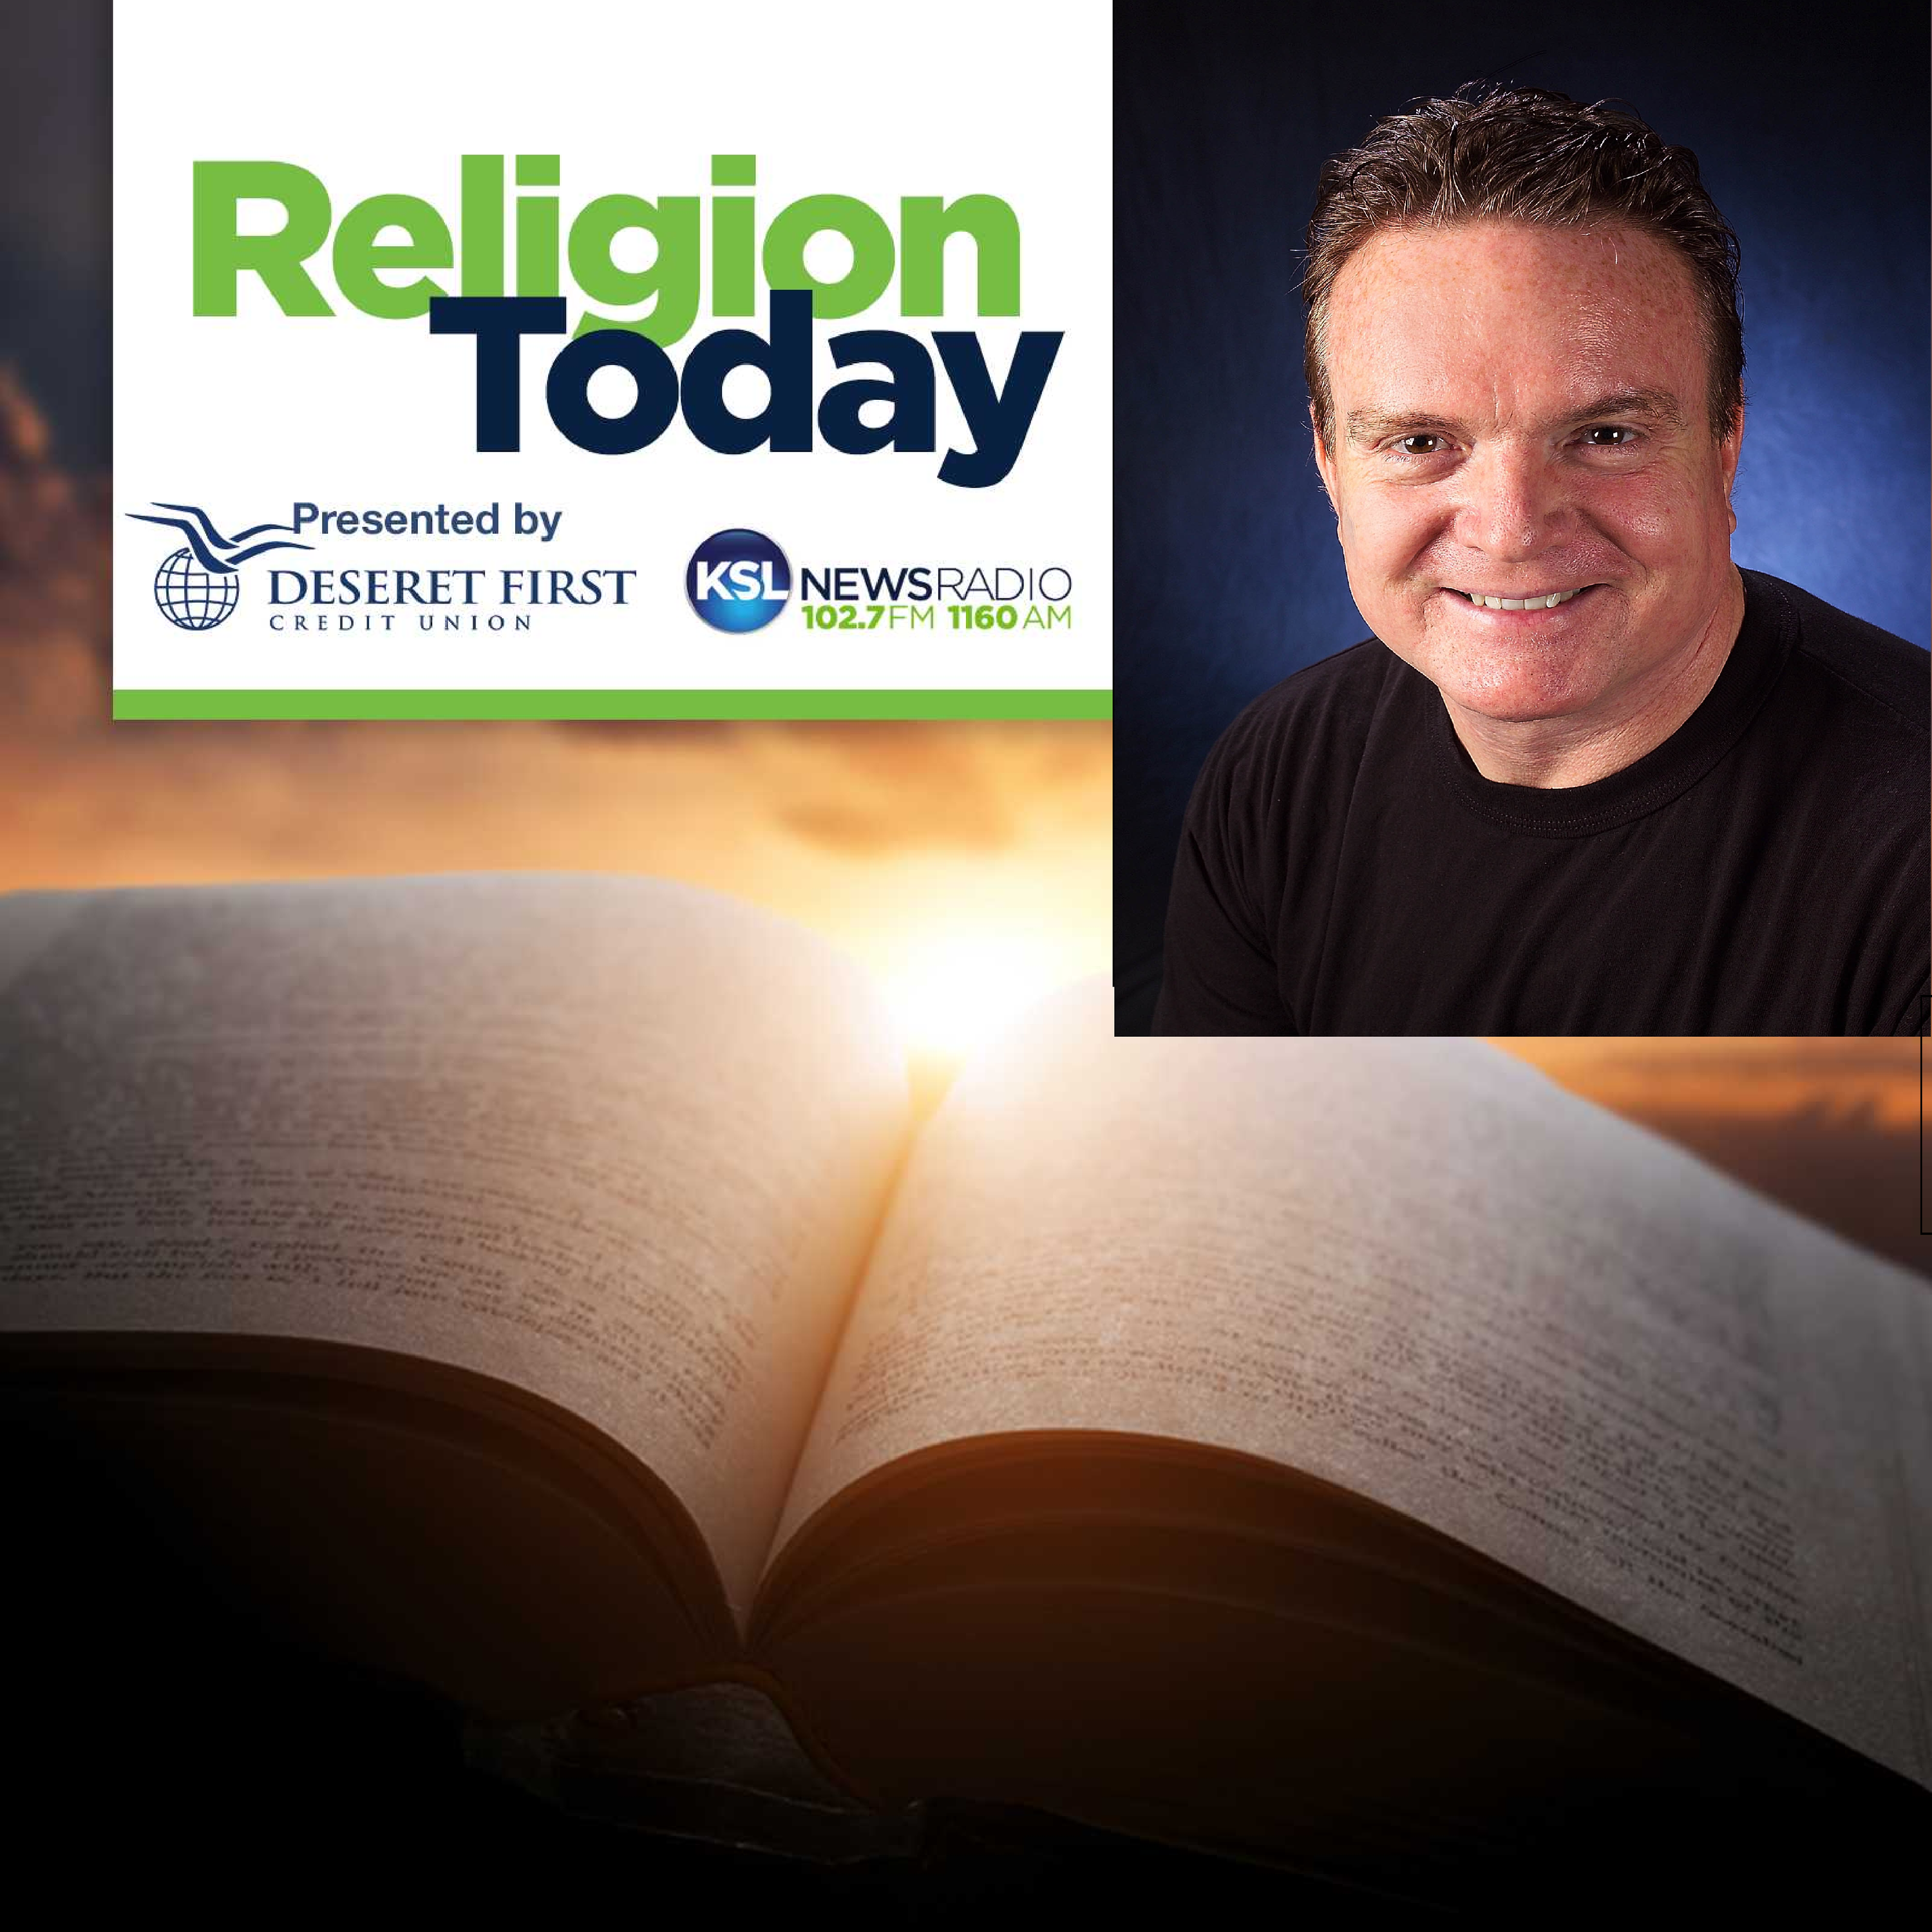 2022-10-22 Religion Today - The Greatest Commandments, to Love God and Others, and Thoughts On How We Can